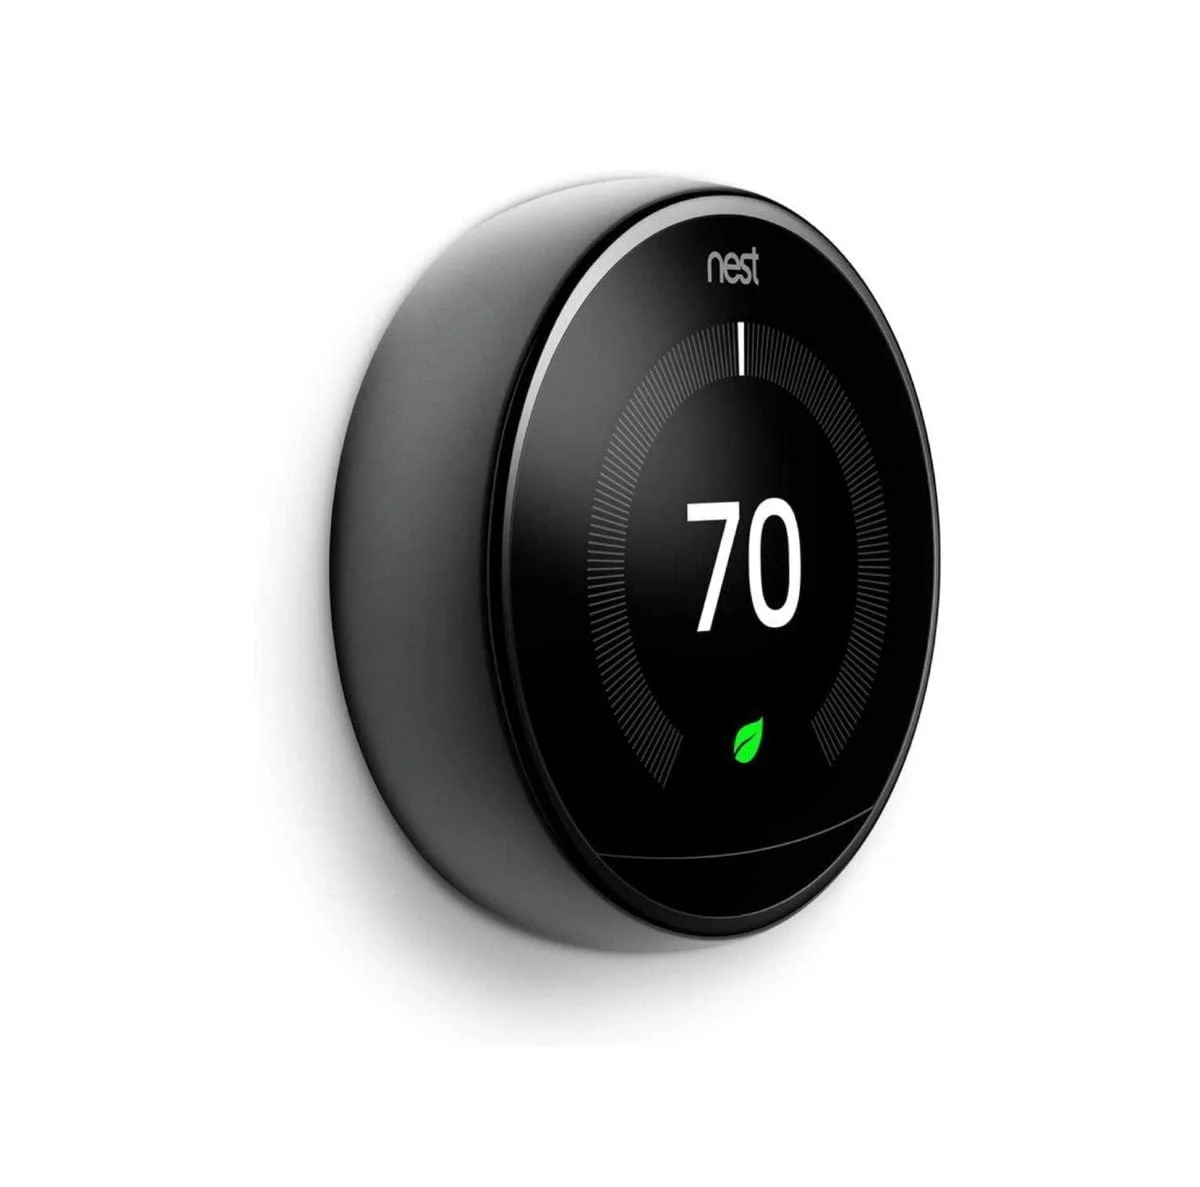 Ewe 03 Scaled Google &Lt;H1&Gt;Google Nest Learning Smart Wifi Thermostat 3Rd Gen - T3018Us Mirror Black&Lt;/H1&Gt; &Lt;Ul Class=&Quot;A-Unordered-List A-Vertical A-Spacing-Mini&Quot;&Gt; &Lt;Li&Gt;&Lt;Span Class=&Quot;A-List-Item&Quot;&Gt;Auto-Schedule: No More Confusing Programming. It Learns The Temperatures You Like And Programs Itself.&Lt;/Span&Gt;&Lt;/Li&Gt; &Lt;Li&Gt;&Lt;Span Class=&Quot;A-List-Item&Quot;&Gt;Wi-Fi Thermostat: Connect The Nest Thermostat To Wi-Fi To Change The Temperature From Your Phone, Tablet Or Laptop.&Lt;/Span&Gt;&Lt;/Li&Gt; &Lt;Li&Gt;&Lt;Span Class=&Quot;A-List-Item&Quot;&Gt;Energy Saving: You’ll See The Nest Leaf When You Choose A Temperature That Saves Energy. It Guides You In The Right Direction.&Lt;/Span&Gt;&Lt;/Li&Gt; &Lt;Li&Gt;&Lt;Span Class=&Quot;A-List-Item&Quot;&Gt;Smart Thermostat: Early-On Nest Learns How Your Home Warms Up And Keeps An Eye On The Weather To Get You The Temperature You Want When You Want It.&Lt;/Span&Gt;&Lt;/Li&Gt; &Lt;Li&Gt;&Lt;Span Class=&Quot;A-List-Item&Quot;&Gt;Home/Away Assist: The Nest Thermostat Automatically Turns Itself Down When You’re Away To Avoid Heating Or Cooling An Empty Home.&Lt;/Span&Gt;&Lt;/Li&Gt; &Lt;Li&Gt;&Lt;Span Class=&Quot;A-List-Item&Quot;&Gt;Works With Amazon Alexa For Voice Control (Alexa Device Sold Separately)&Lt;/Span&Gt;&Lt;/Li&Gt; &Lt;Li&Gt;&Lt;Span Class=&Quot;A-List-Item&Quot;&Gt;Auto-Schedule: Nest Learns The Temperatures You Like And Programs Itself In About A Week.&Lt;/Span&Gt; &Lt;H5&Gt;Note : Direct Replacement Warranty One Year&Lt;/H5&Gt; &Lt;Div Class=&Quot;Html-Fragment&Quot;&Gt; &Lt;Div&Gt; &Lt;B&Gt;We Also Provide International Wholesale And Retail Shipping To All Gcc Countries: Saudi Arabia, Qatar, Oman, Kuwait, Bahrain.&Lt;/B&Gt; &Lt;/Div&Gt; &Lt;/Div&Gt;&Lt;/Li&Gt; &Lt;/Ul&Gt; &Lt;Div Class=&Quot;A-Row A-Expander-Container A-Expander-Inline-Container&Quot; Aria-Live=&Quot;Polite&Quot;&Gt; &Lt;Div Class=&Quot;A-Expander-Content A-Expander-Extend-Content A-Expander-Content-Expanded&Quot; Aria-Expanded=&Quot;True&Quot;&Gt;&Lt;/Div&Gt; &Lt;/Div&Gt; Thermostat Google Nest Learning Smart Wifi Thermostat 3Rd Gen - T3018Us Mirror Black